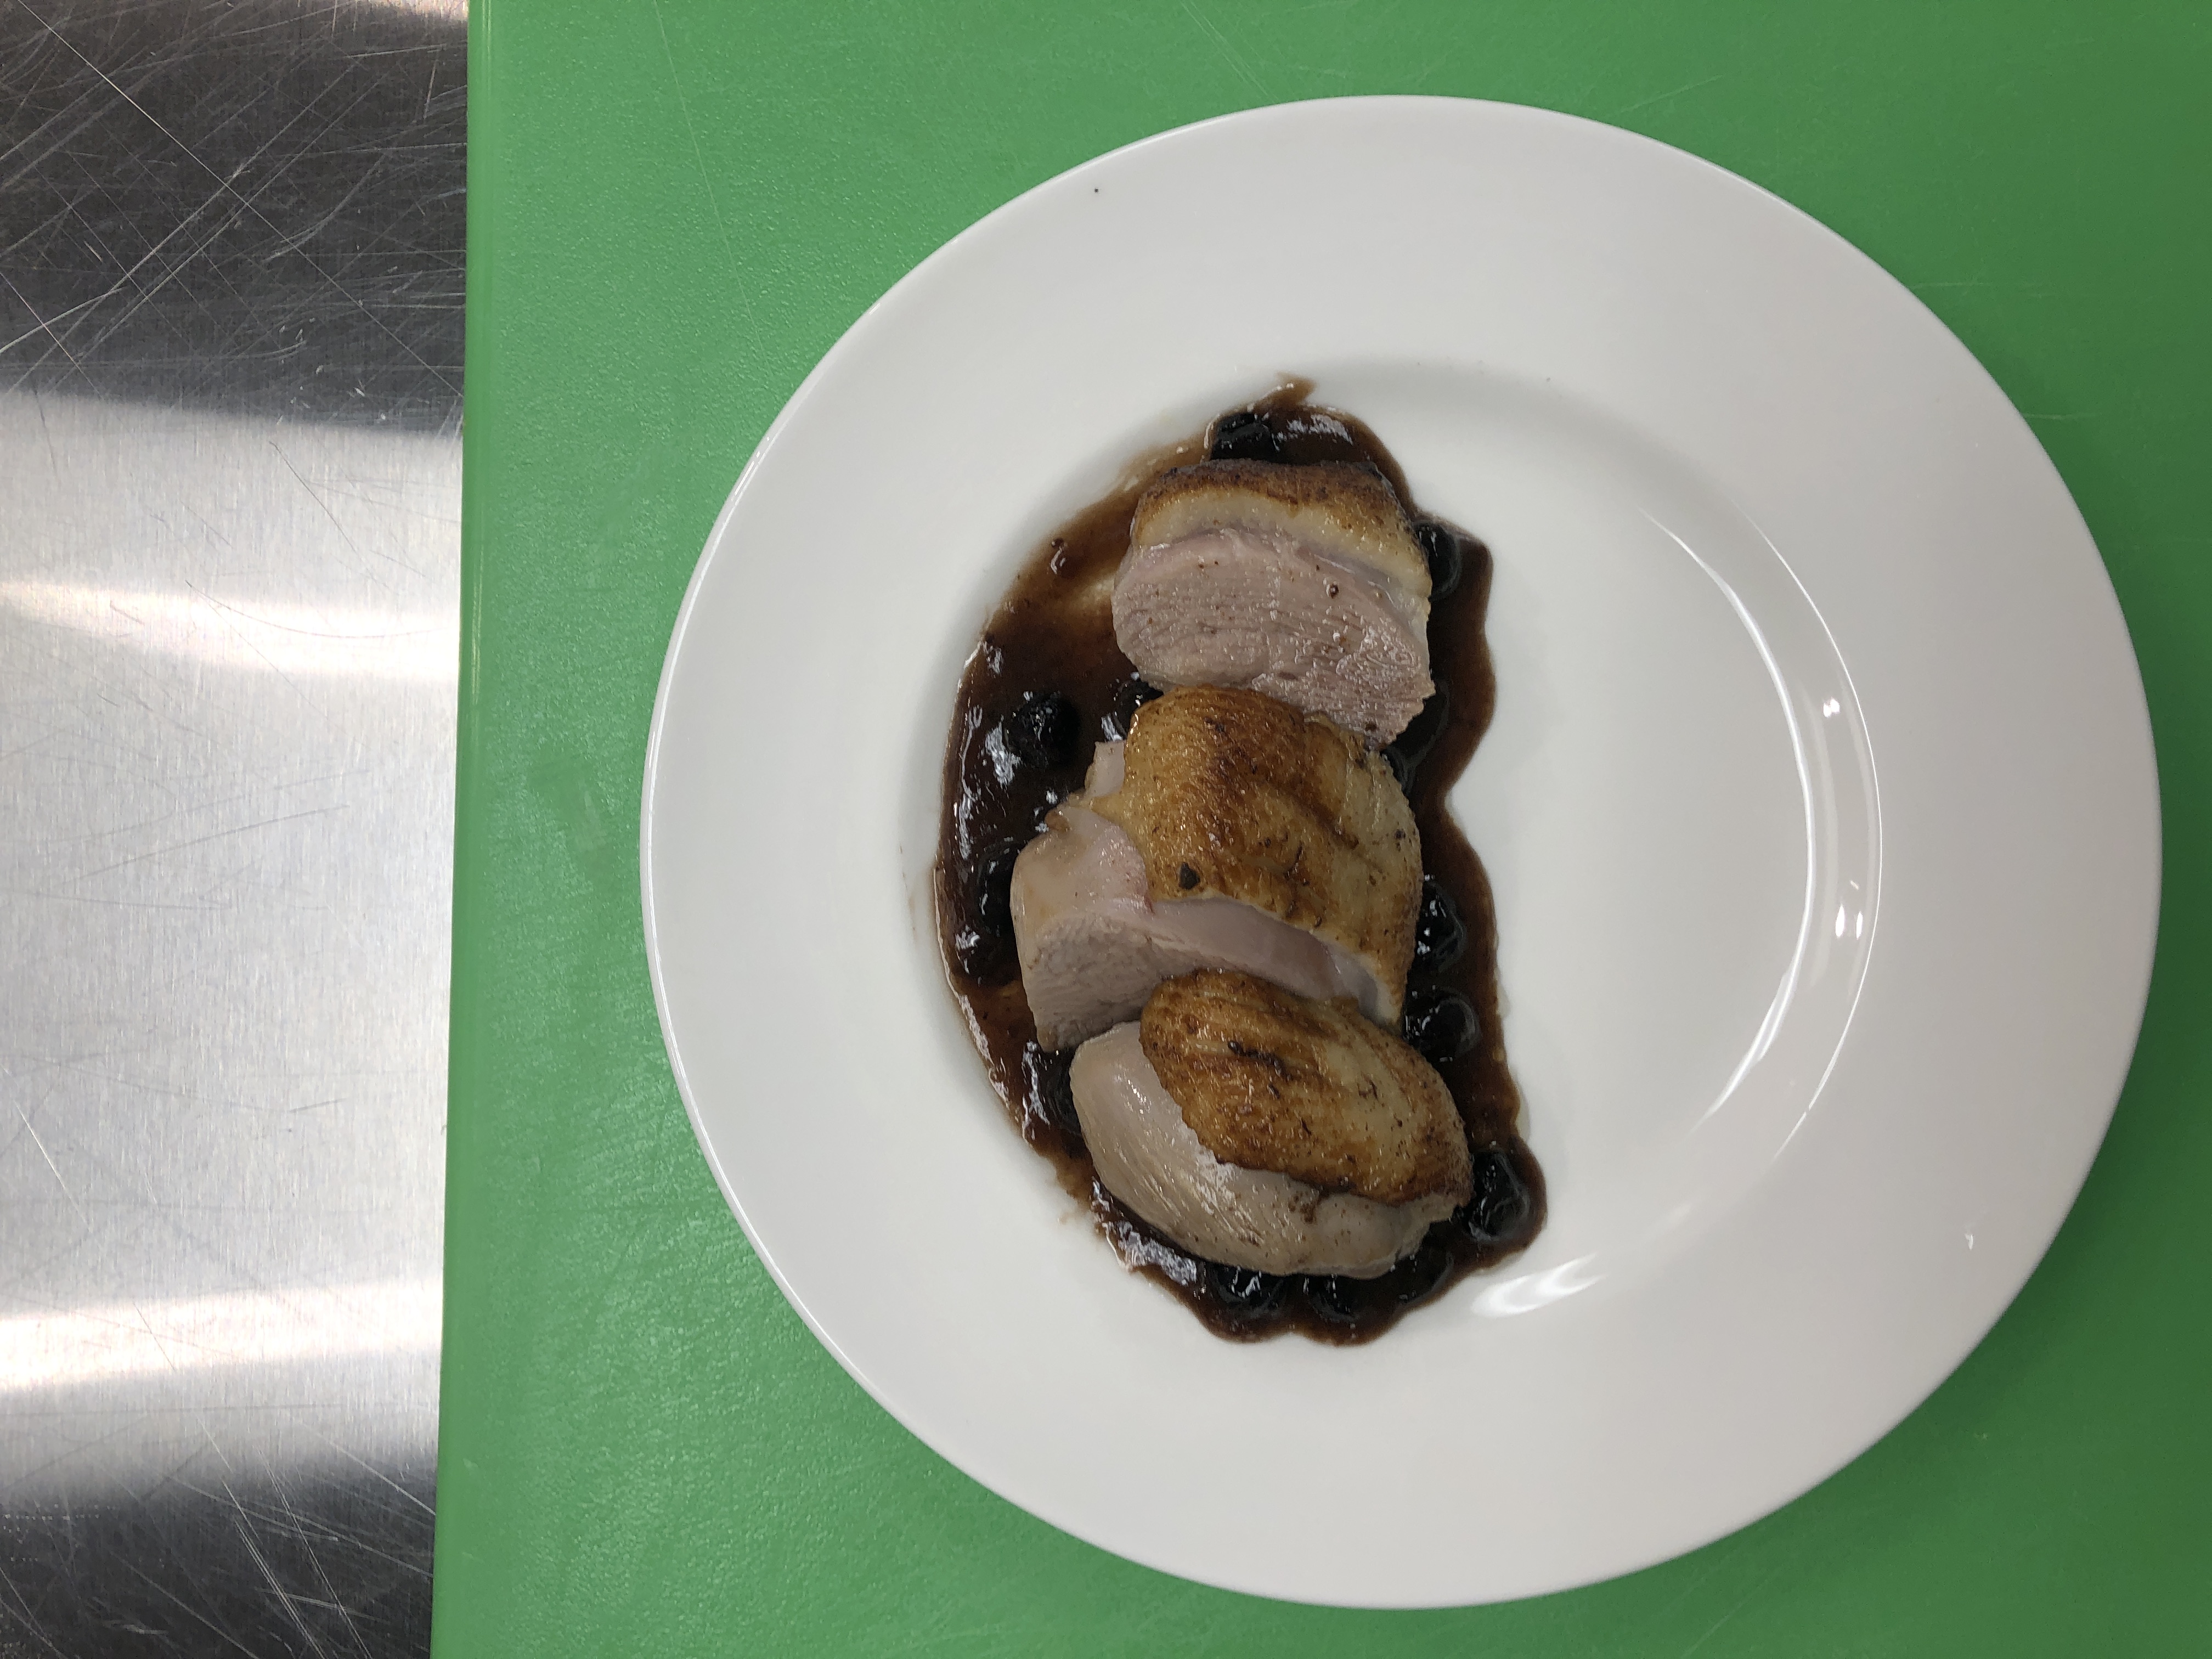 Hickory Smoked Duck Breast With Blueberry Demi Glaze